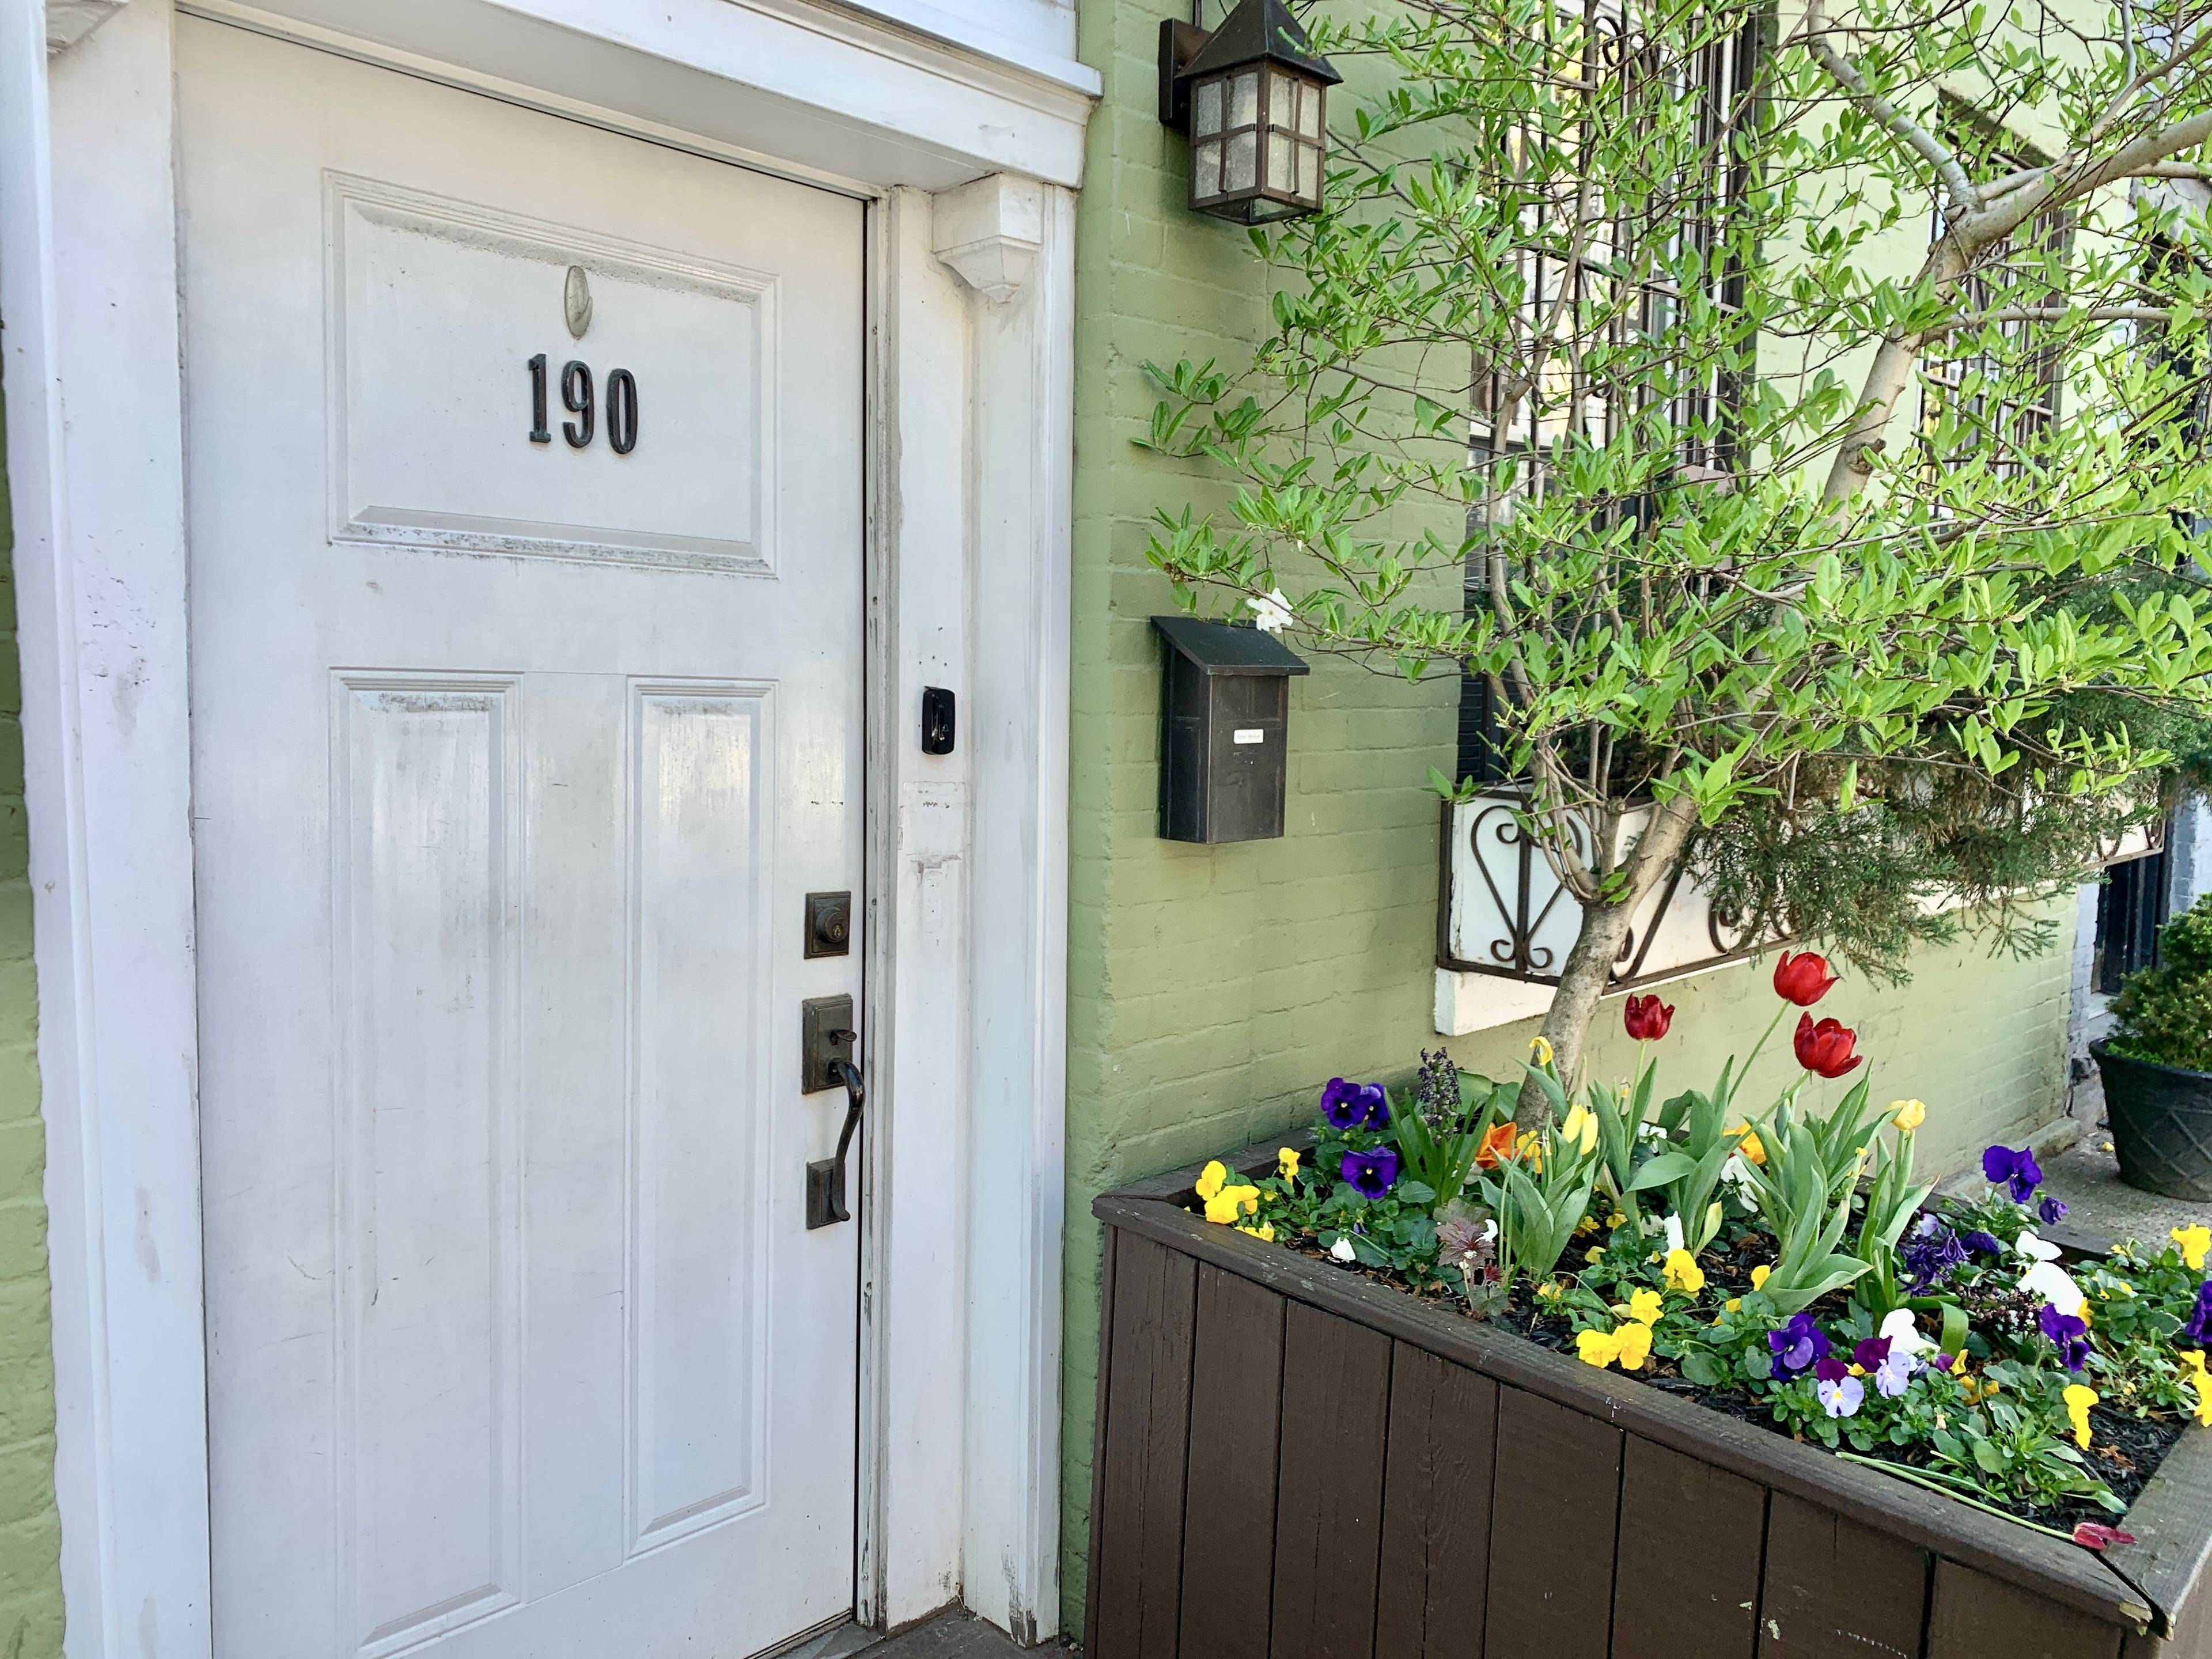 This 3 story single family townhouse with full basement and blissful garden oasis is a charmer in downtown Brooklyn.